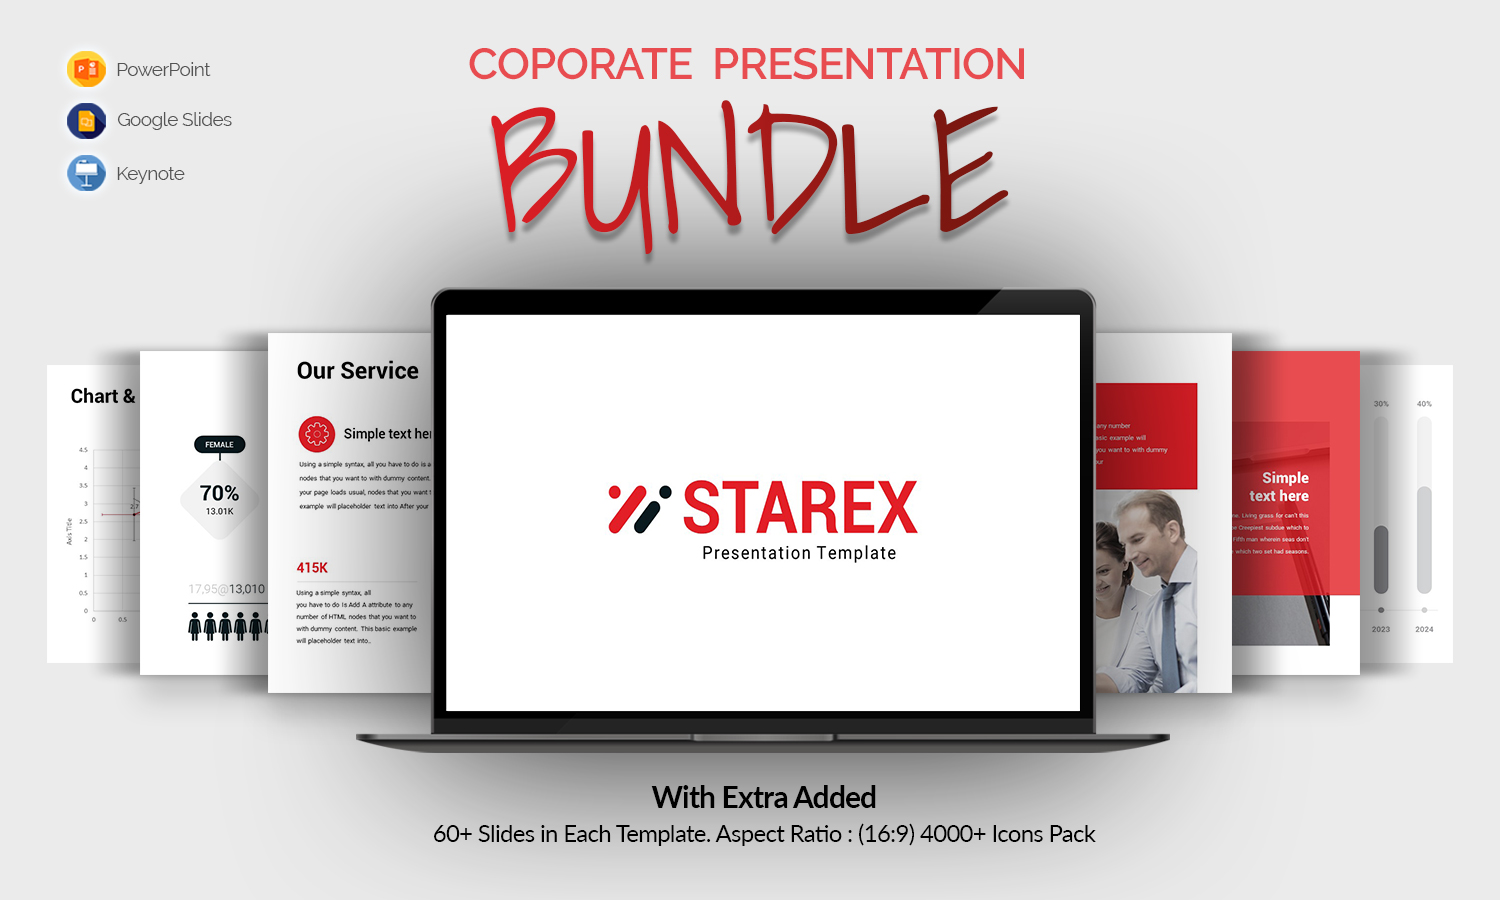 Corporate Presentation Template for Business